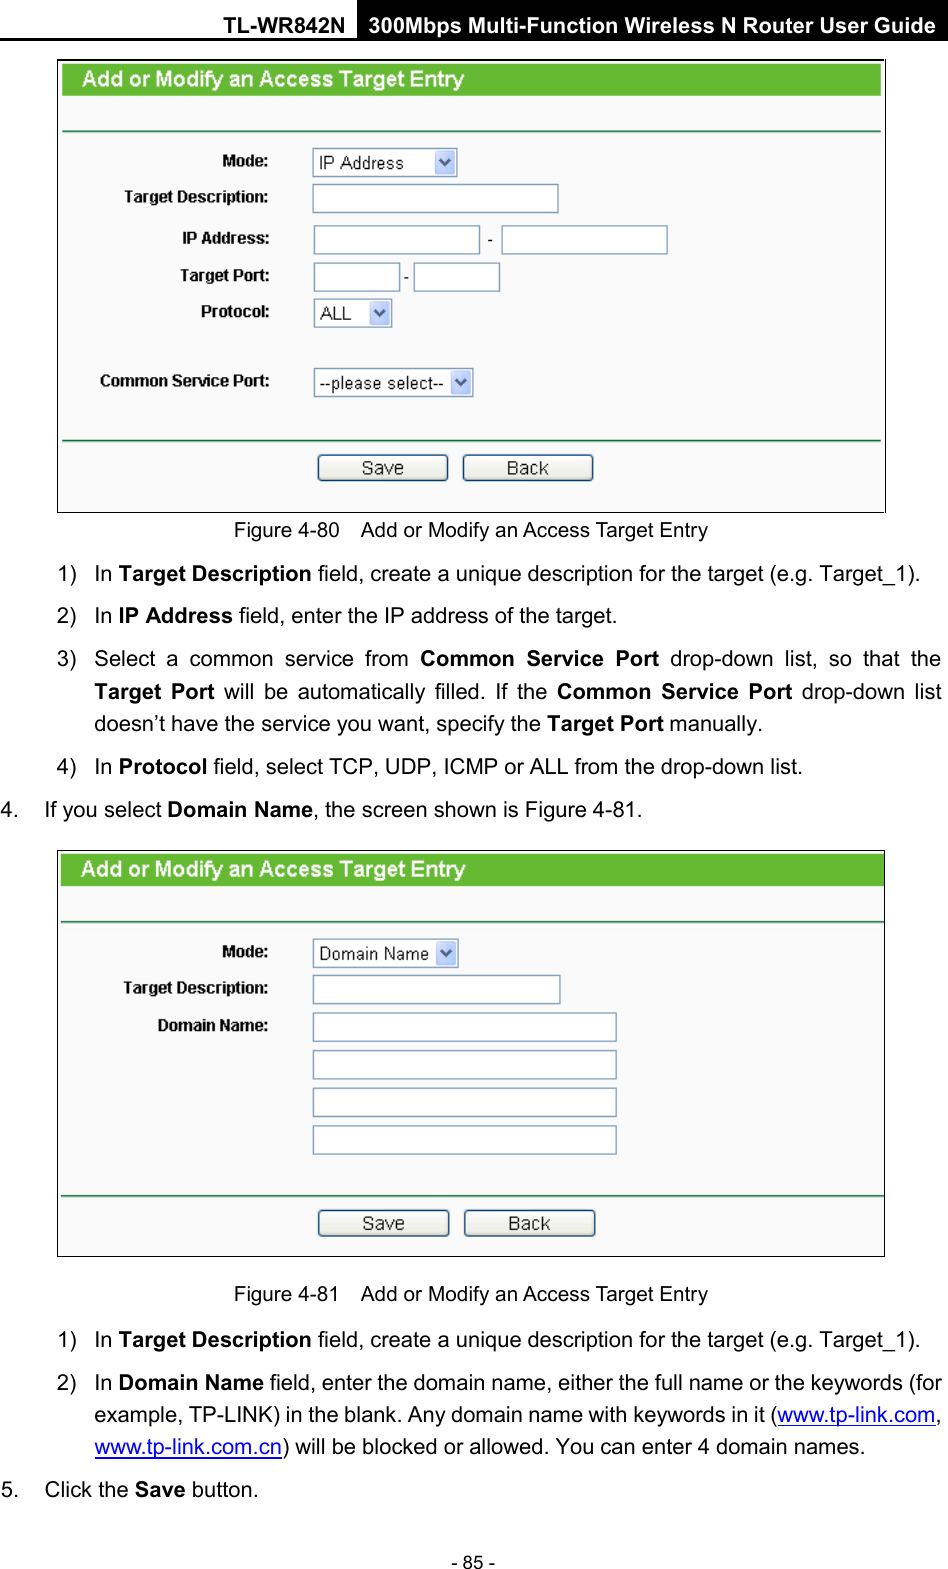 TL-WR842N 300Mbps Multi-Function Wireless N Router User Guide  - 85 -  Figure 4-80  Add or Modify an Access Target Entry 1) In Target Description field, create a unique description for the target (e.g. Target_1). 2)  In IP Address field, enter the IP address of the target. 3) Select a common service from Common Service Port drop-down list, so that the Target Port will be automatically filled. If the Common Service Port drop-down  list doesn’t have the service you want, specify the Target Port manually. 4)  In Protocol field, select TCP, UDP, ICMP or ALL from the drop-down list.  4. If you select Domain Name, the screen shown is Figure 4-81.  Figure 4-81  Add or Modify an Access Target Entry 1) In Target Description field, create a unique description for the target (e.g. Target_1). 2)  In Domain Name field, enter the domain name, either the full name or the keywords (for example, TP-LINK) in the blank. Any domain name with keywords in it (www.tp-link.com, www.tp-link.com.cn) will be blocked or allowed. You can enter 4 domain names. 5. Click the Save button. 